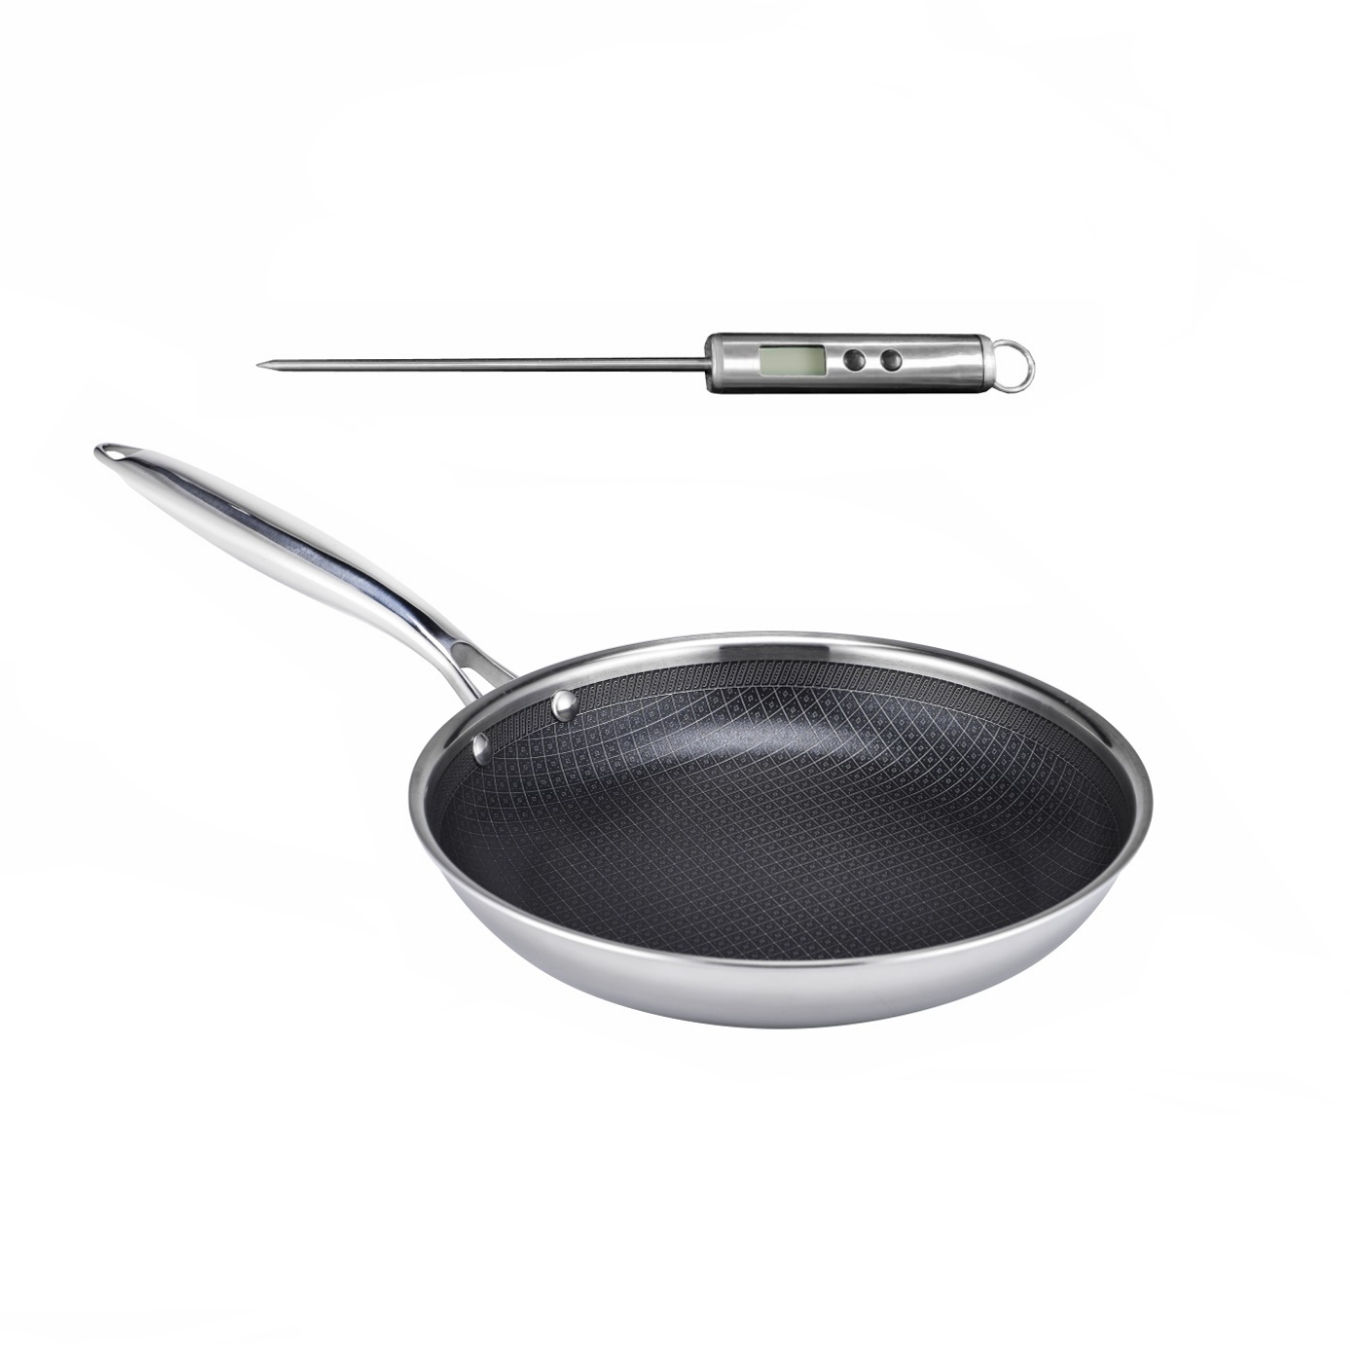 View Titan Pan 20cm Breakfast Pan and Thermometer information